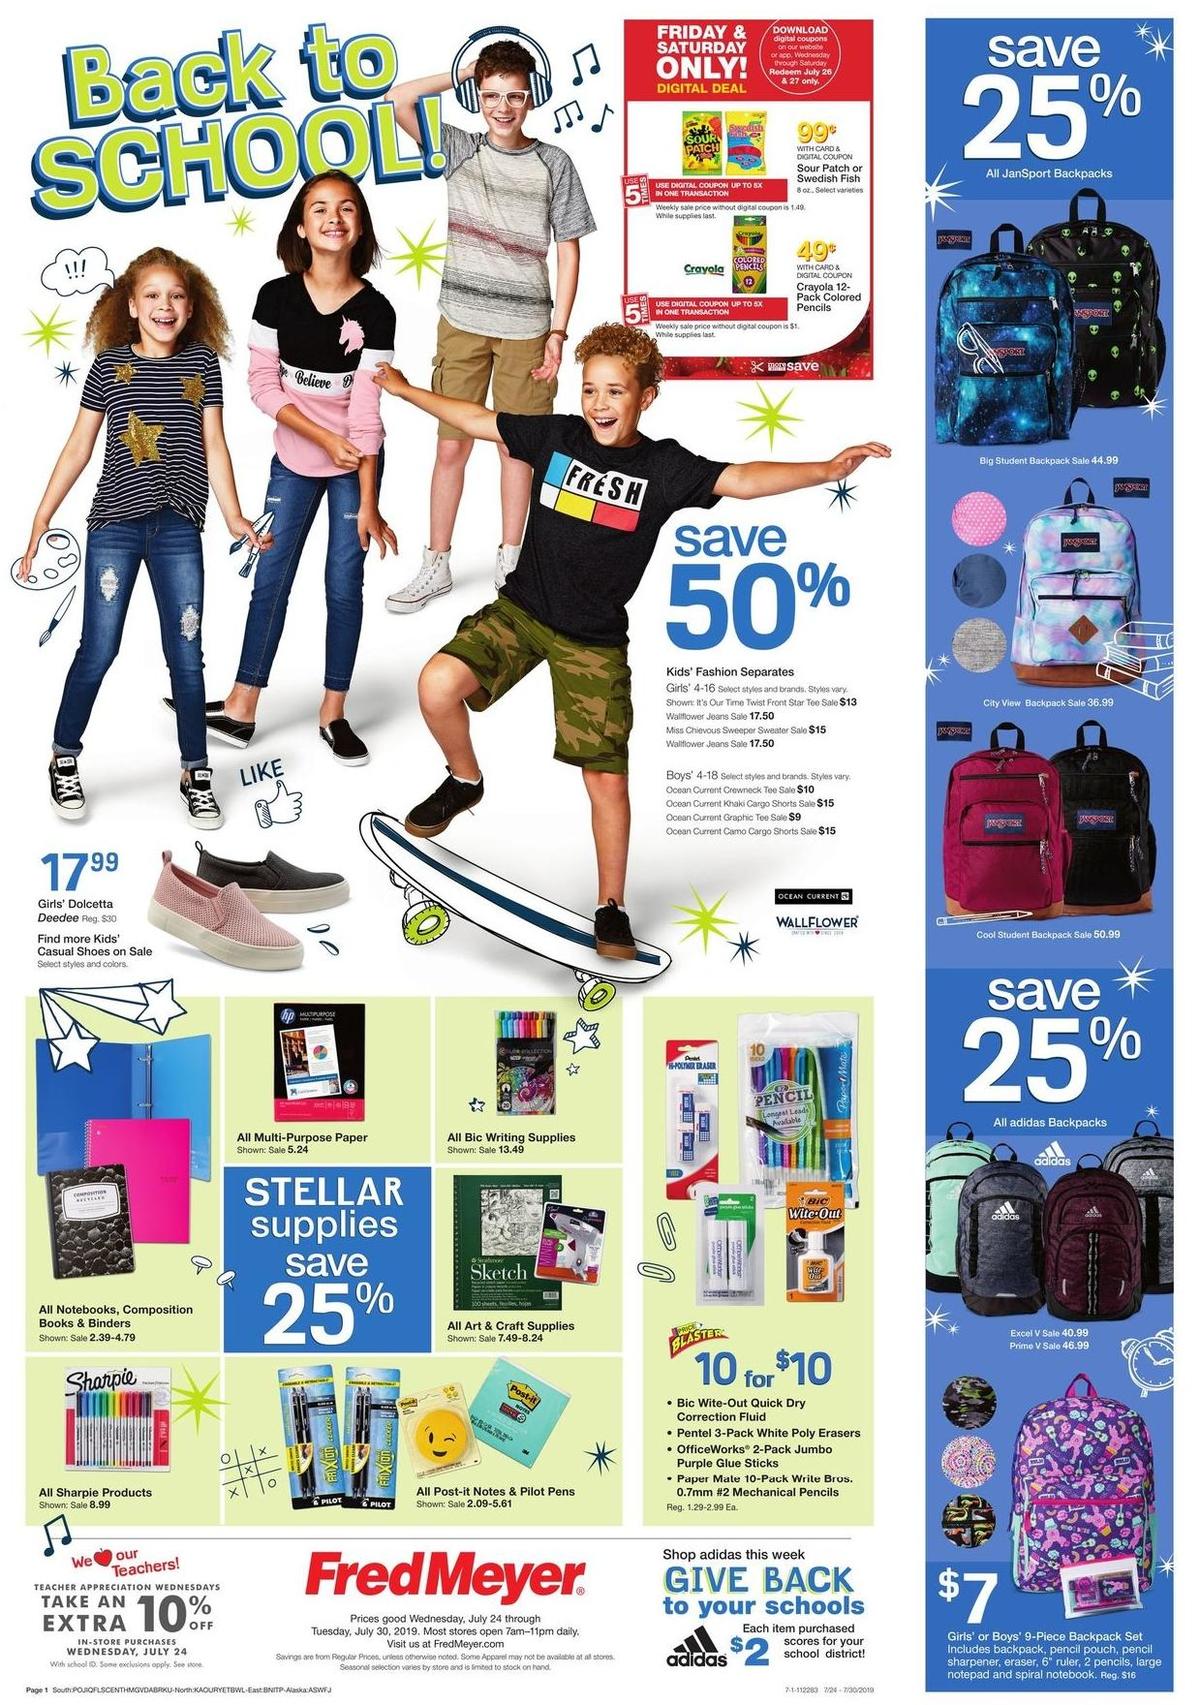 Fred Meyer Back to School Weekly Ad from July 24